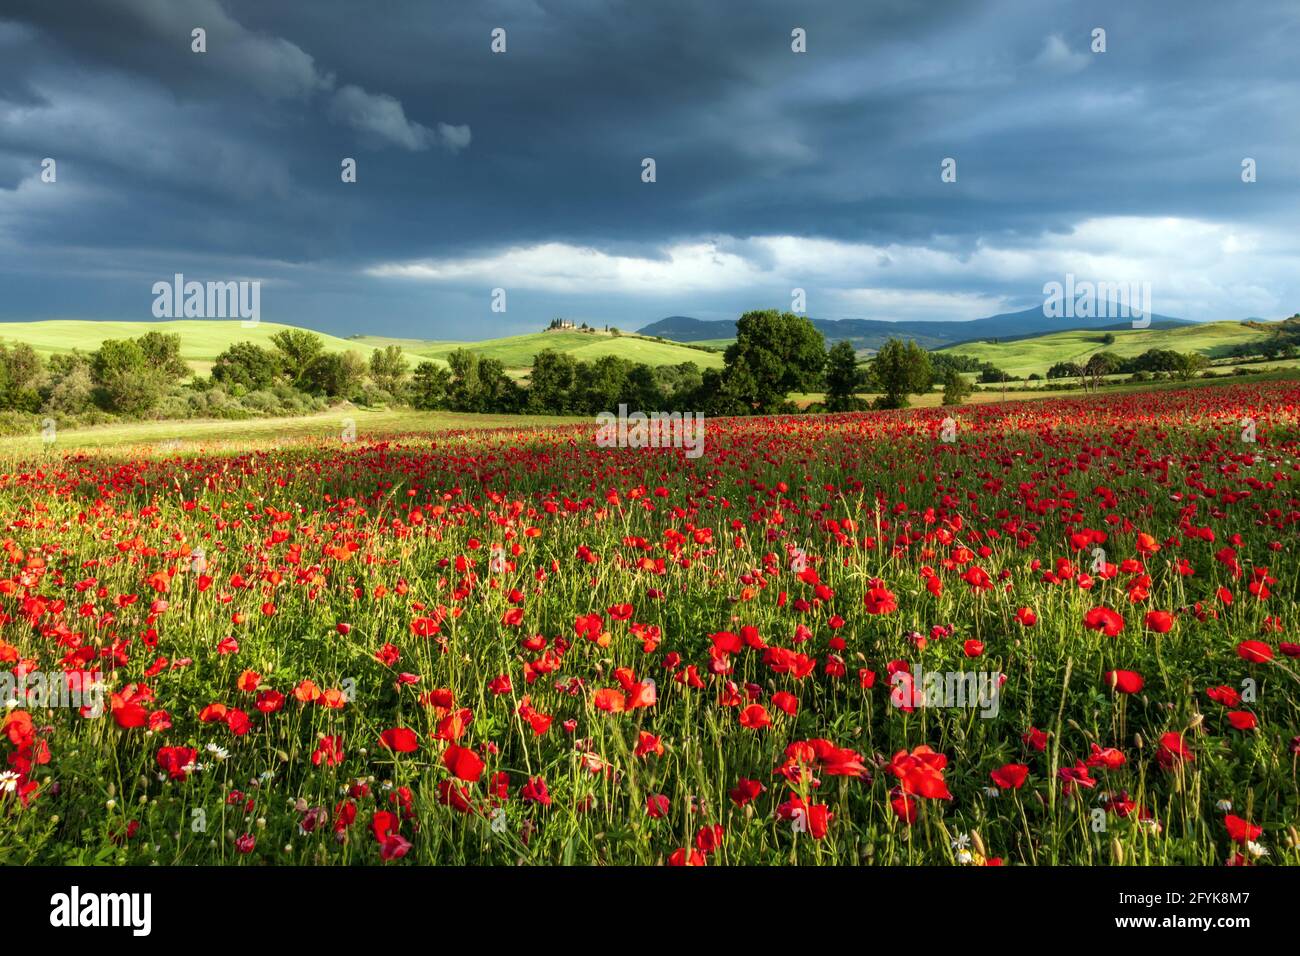 A field of red poppies with threatening dark clouds in Val d'Orcia, Tuscany. Stock Photo